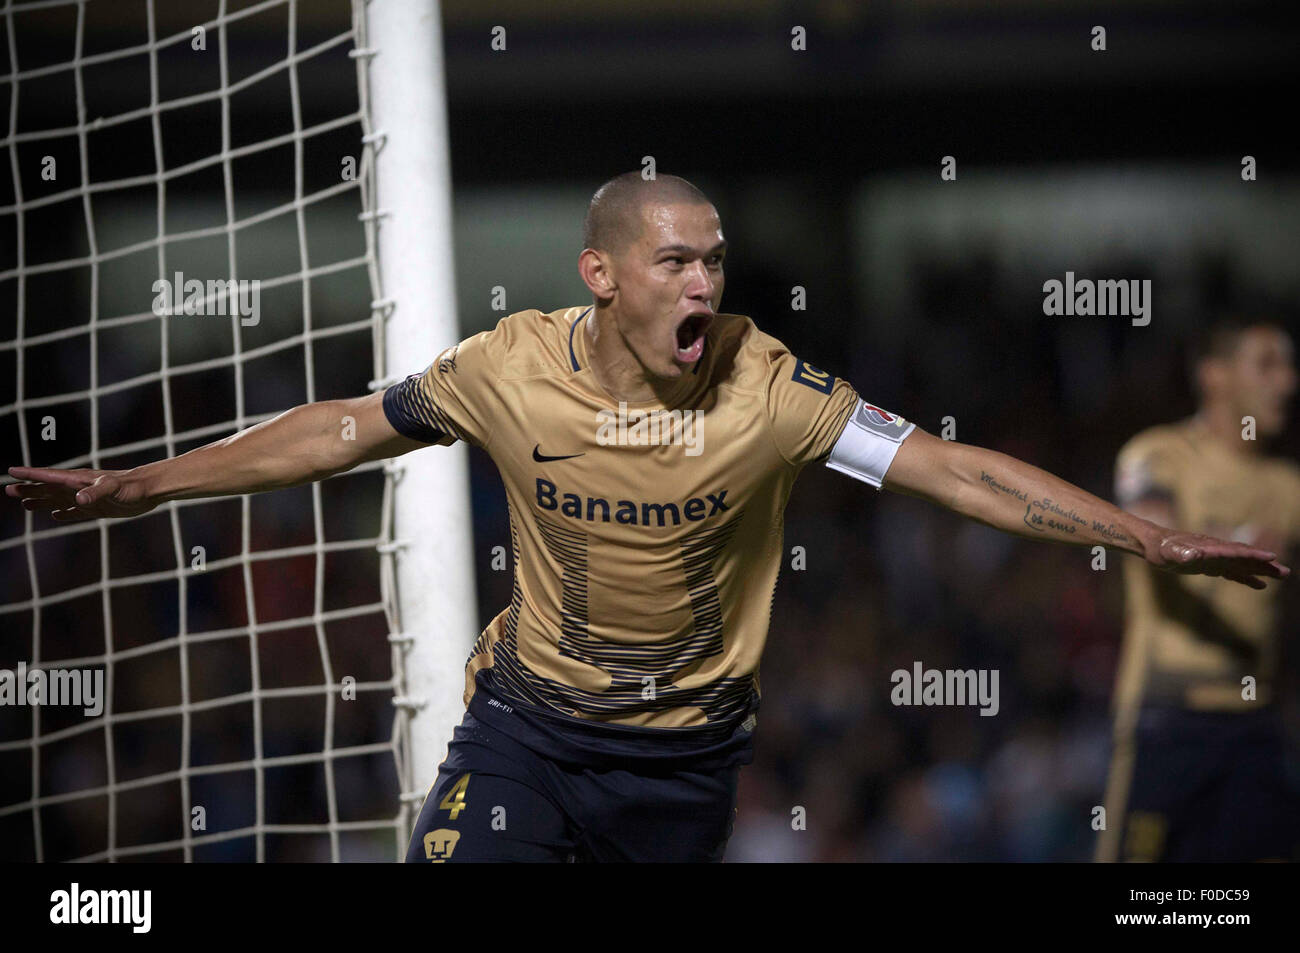 Mexico City, Mexico. 12th Aug, 2015. Image taken for Club Universidad Nacional A.C. (PUMAS) shows UNAM's Pumas Dario Veron celebrating his scoring during the match of Day 4 of 2015 Opening Tournament of MX League against Atlas, at University Olympic Stadium, in Mexico City, capital of Mexico, on Aug. 12, 2015. Credit:  Alejandro Ayala/Xinhua/Alamy Live News Stock Photo